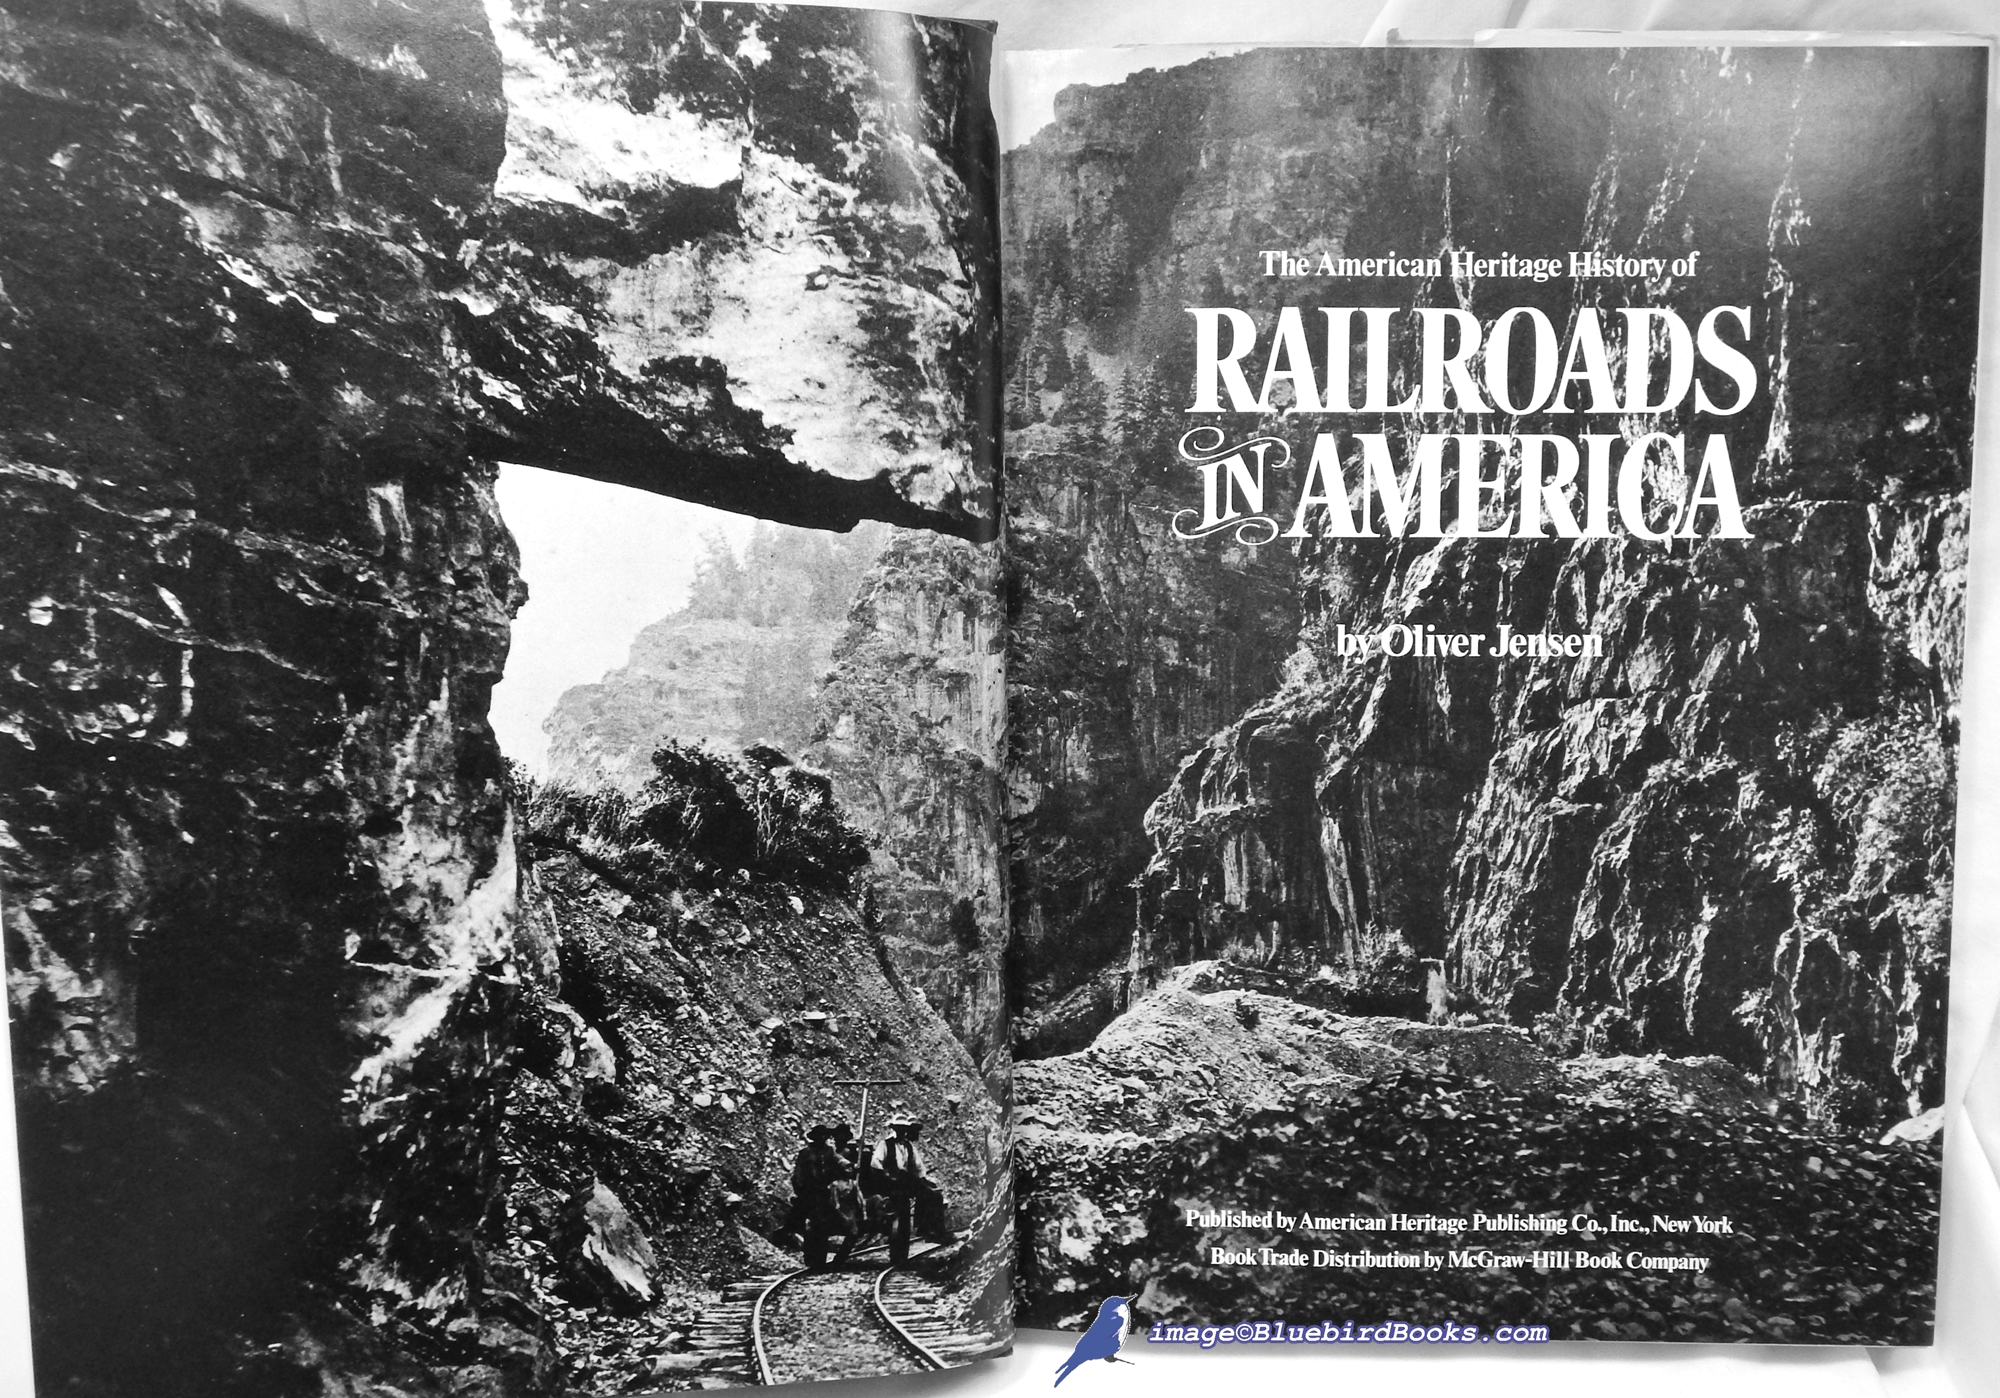 JENSEN, OLIVER - The American Heritage History of Railroads in America